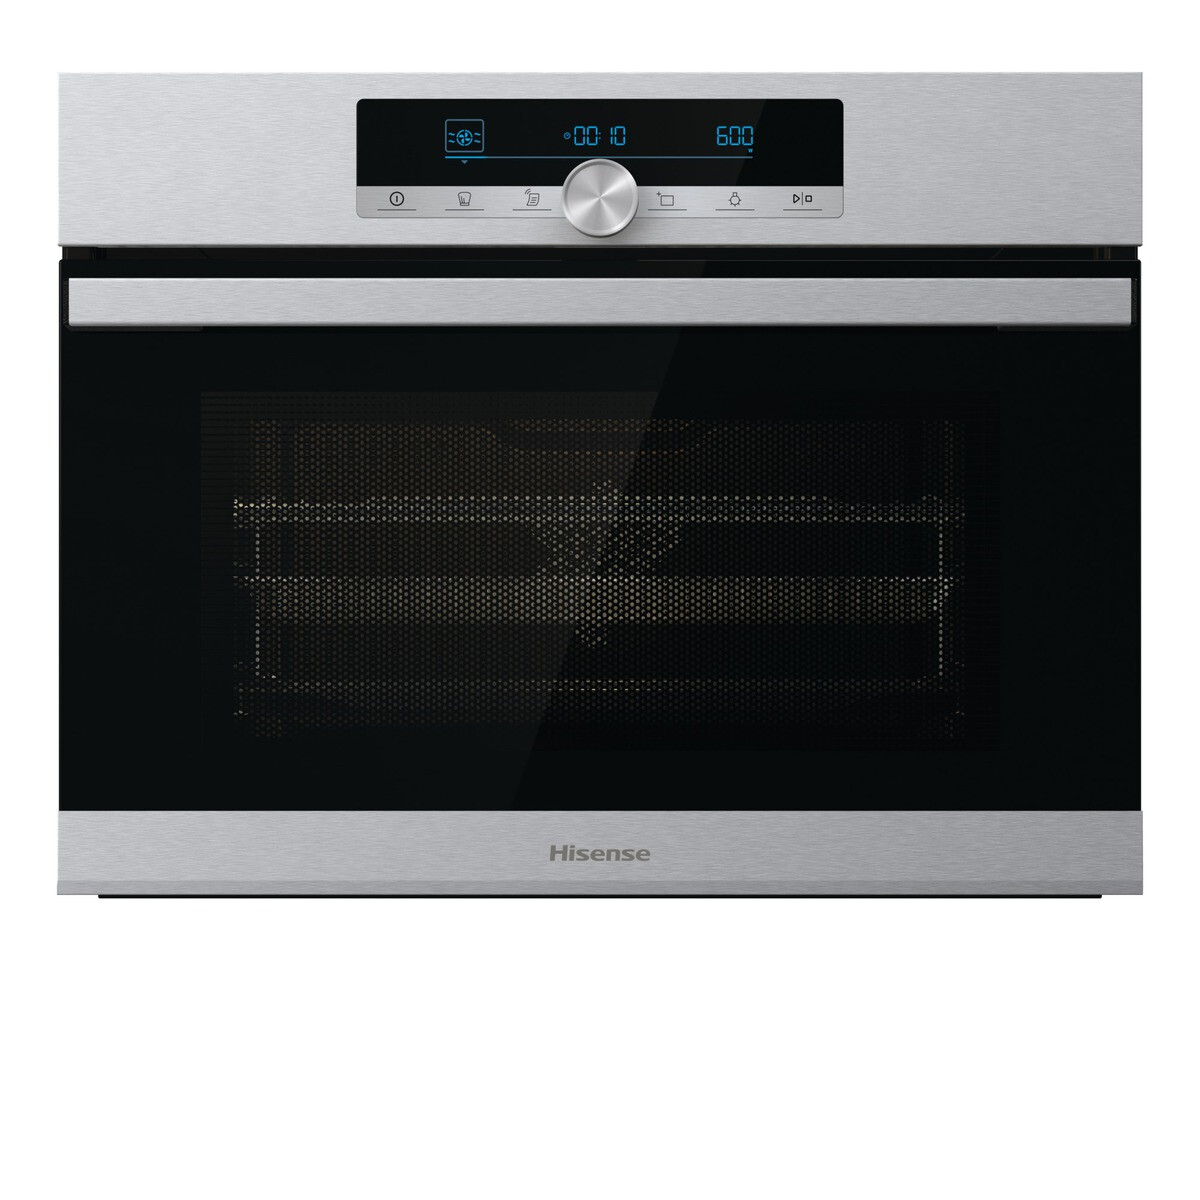 Hisense BIM44321AX Built In Compact Electric Single Oven with Microwave Function – Stainless Steel #363713